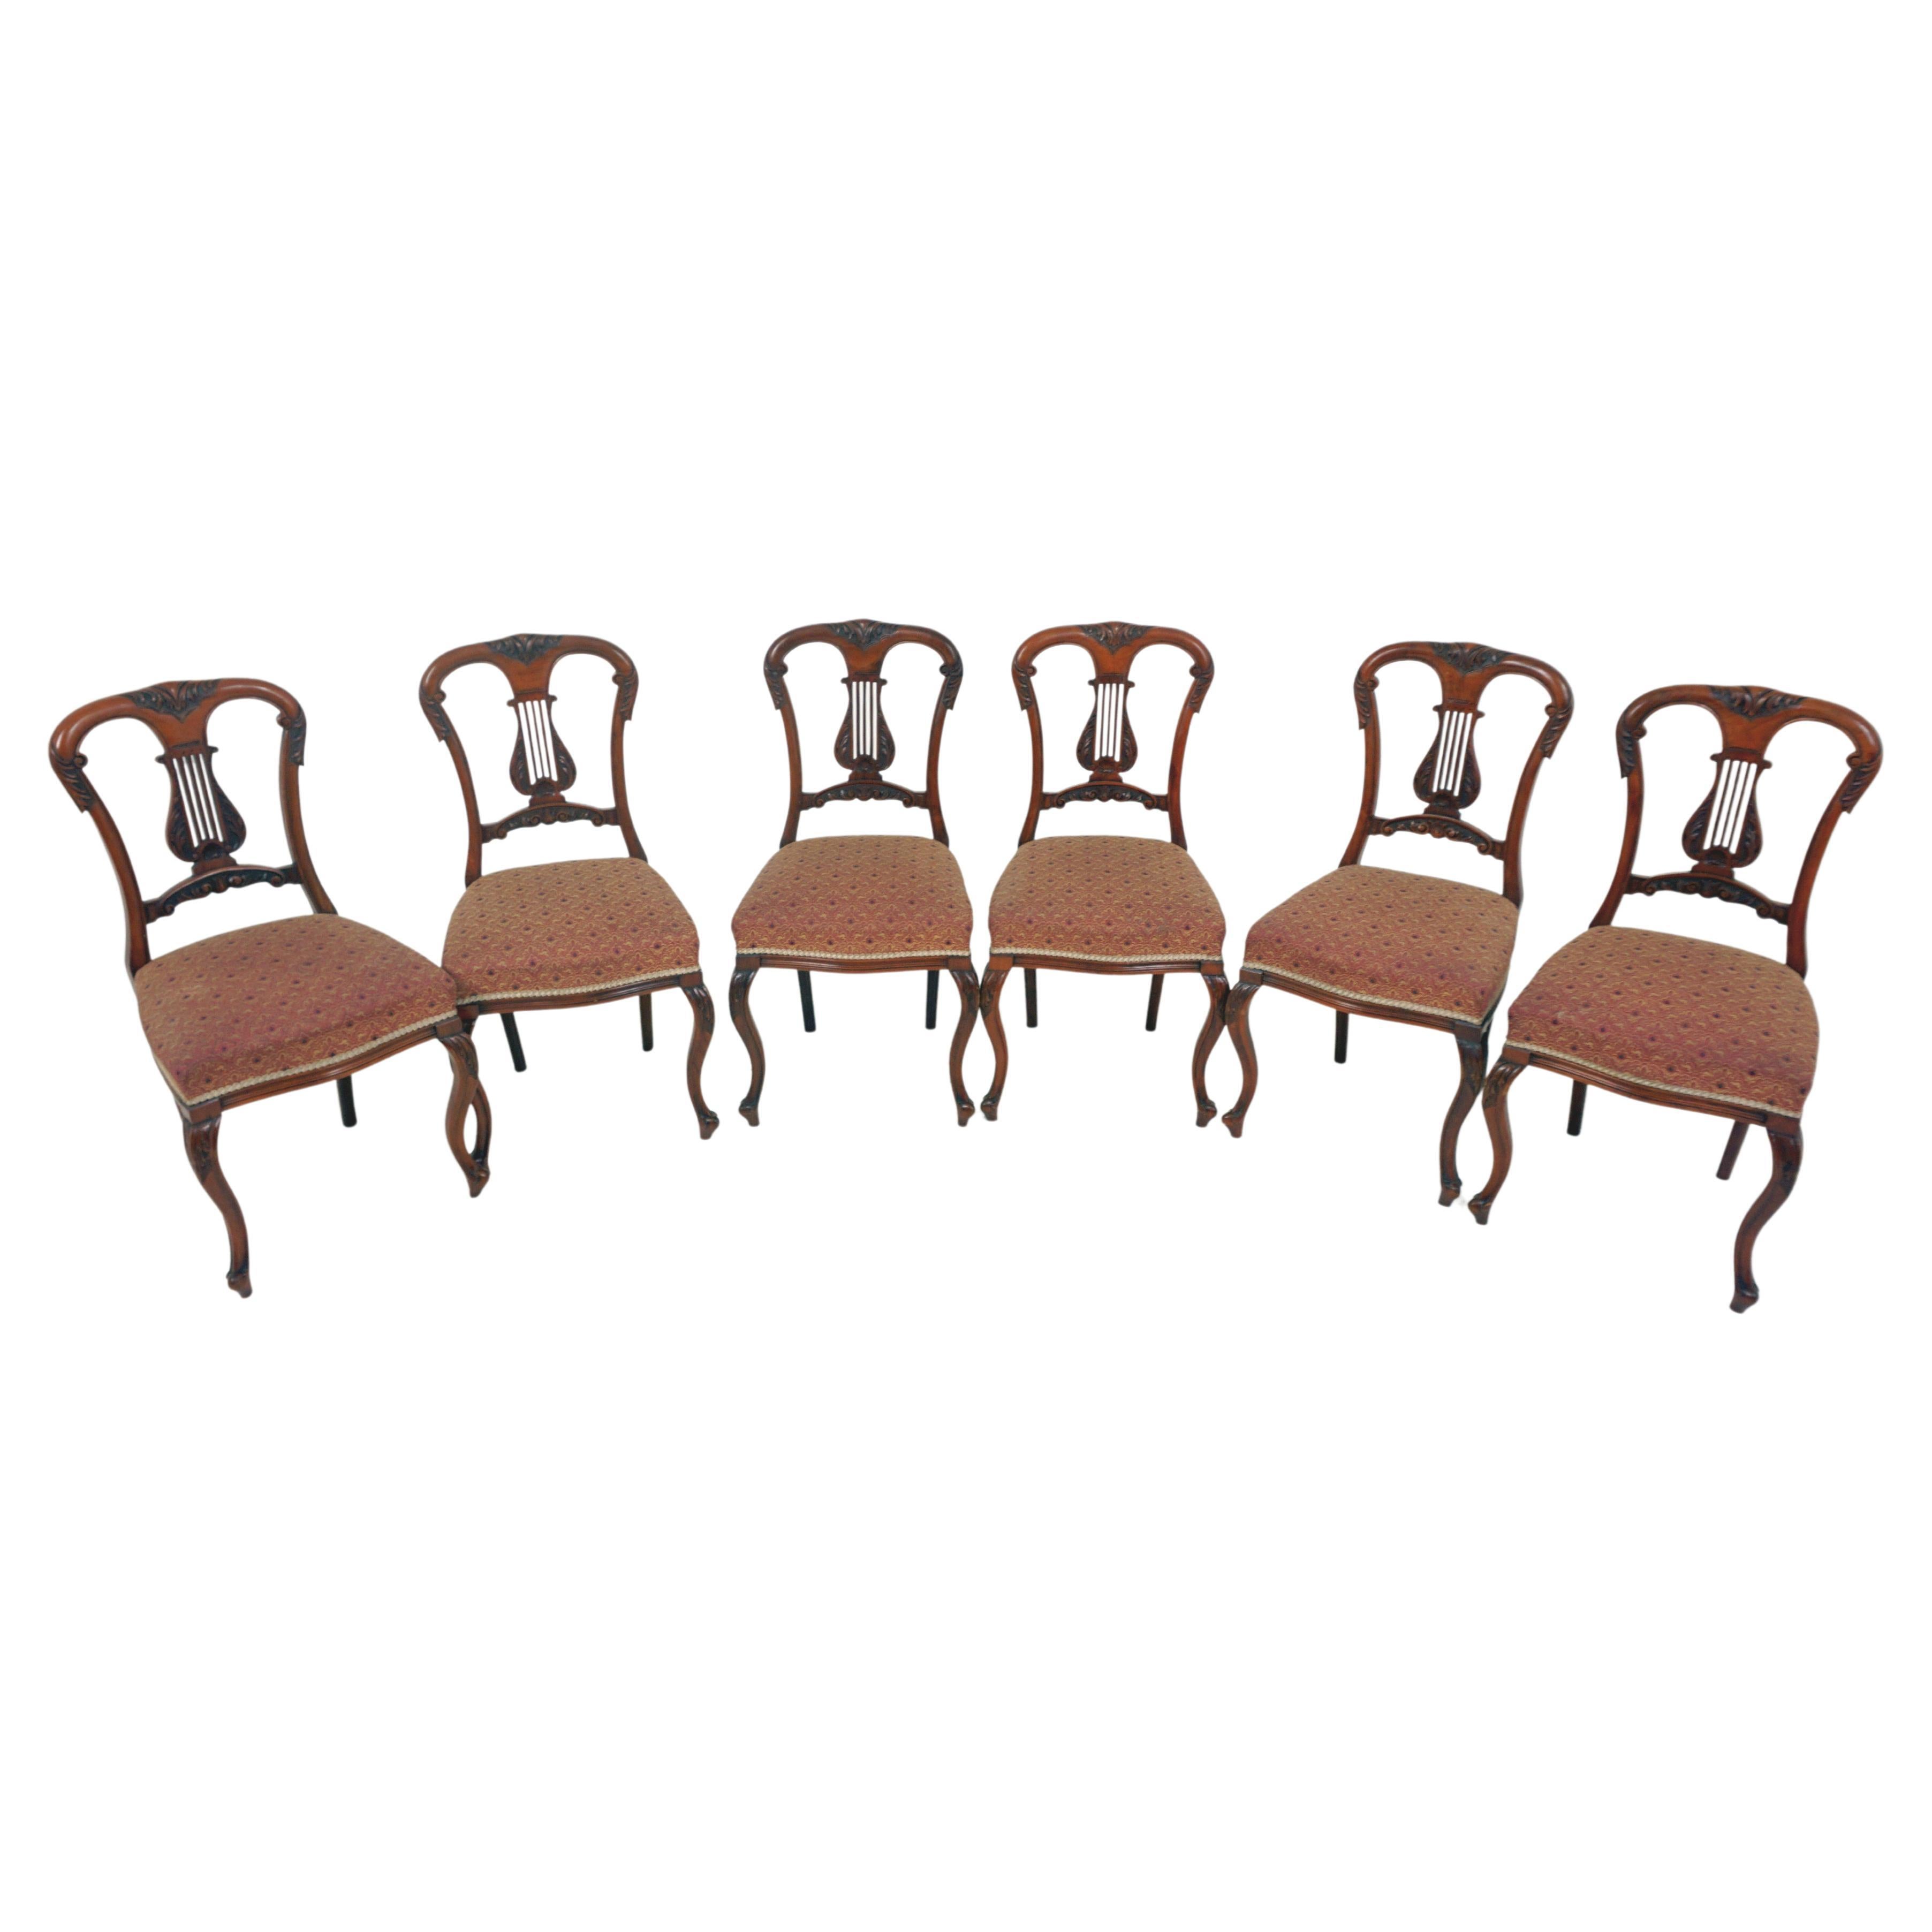 Set of 6 Antique Victorian Carved Walnut Dining Chairs, Scotland 1890, H223